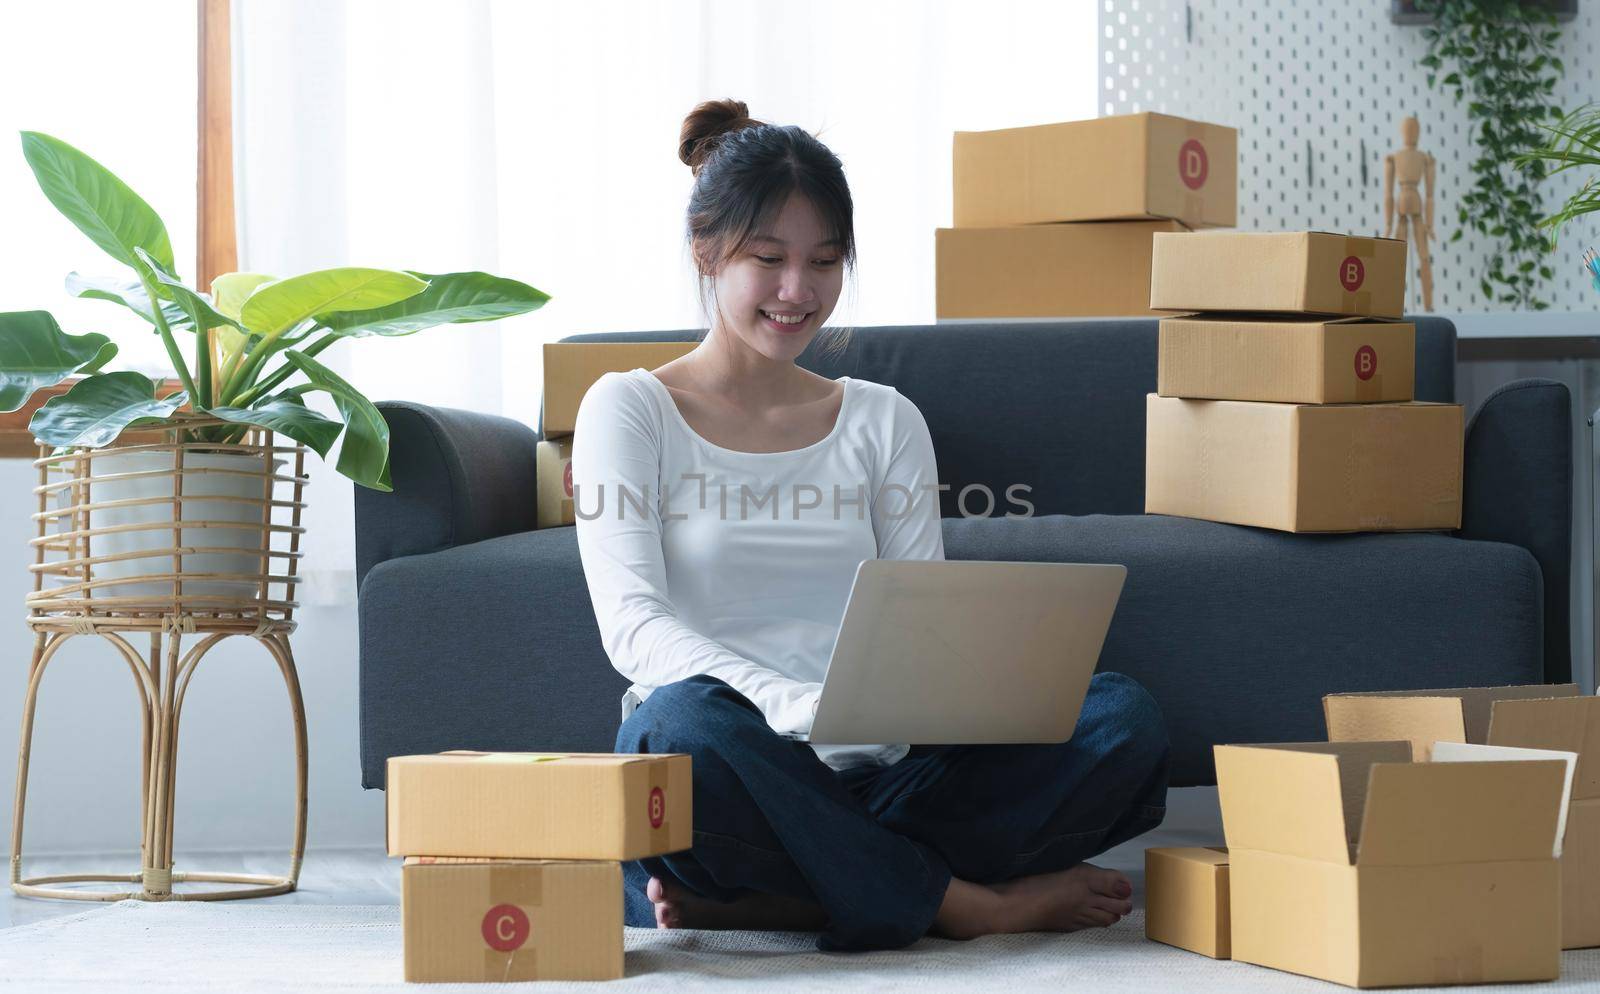 Starting small businesses SME owners female entrepreneurs check online orders to prepare to pack the boxes, sell to customers, sme business ideas online..